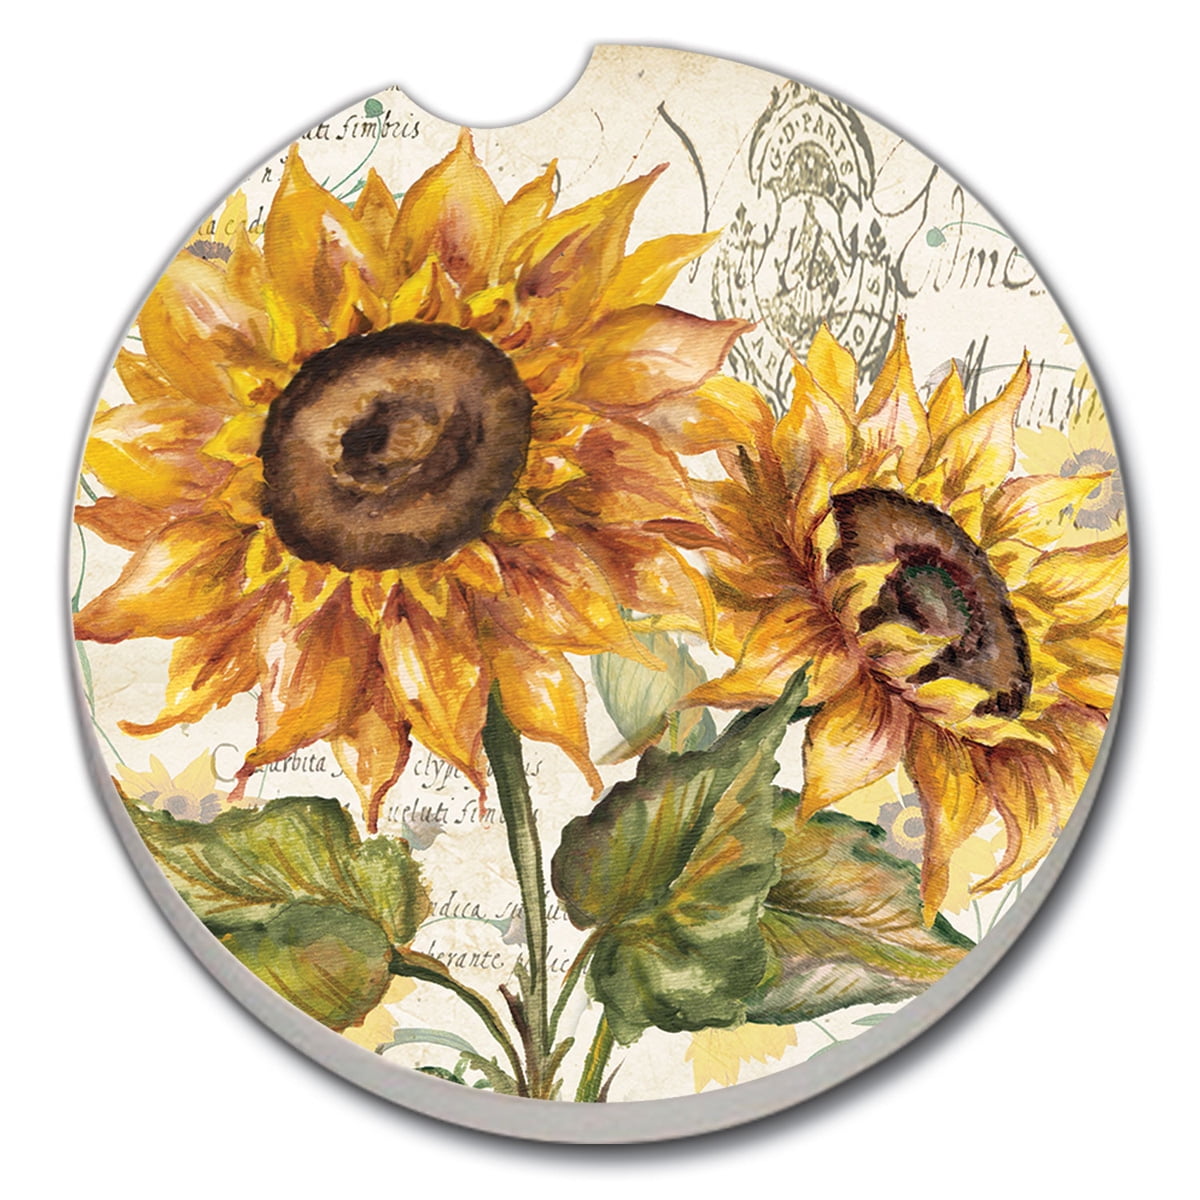 Set of 2 Simulated Oil Painting Autumn Sunflower Sandstone Car Coasters